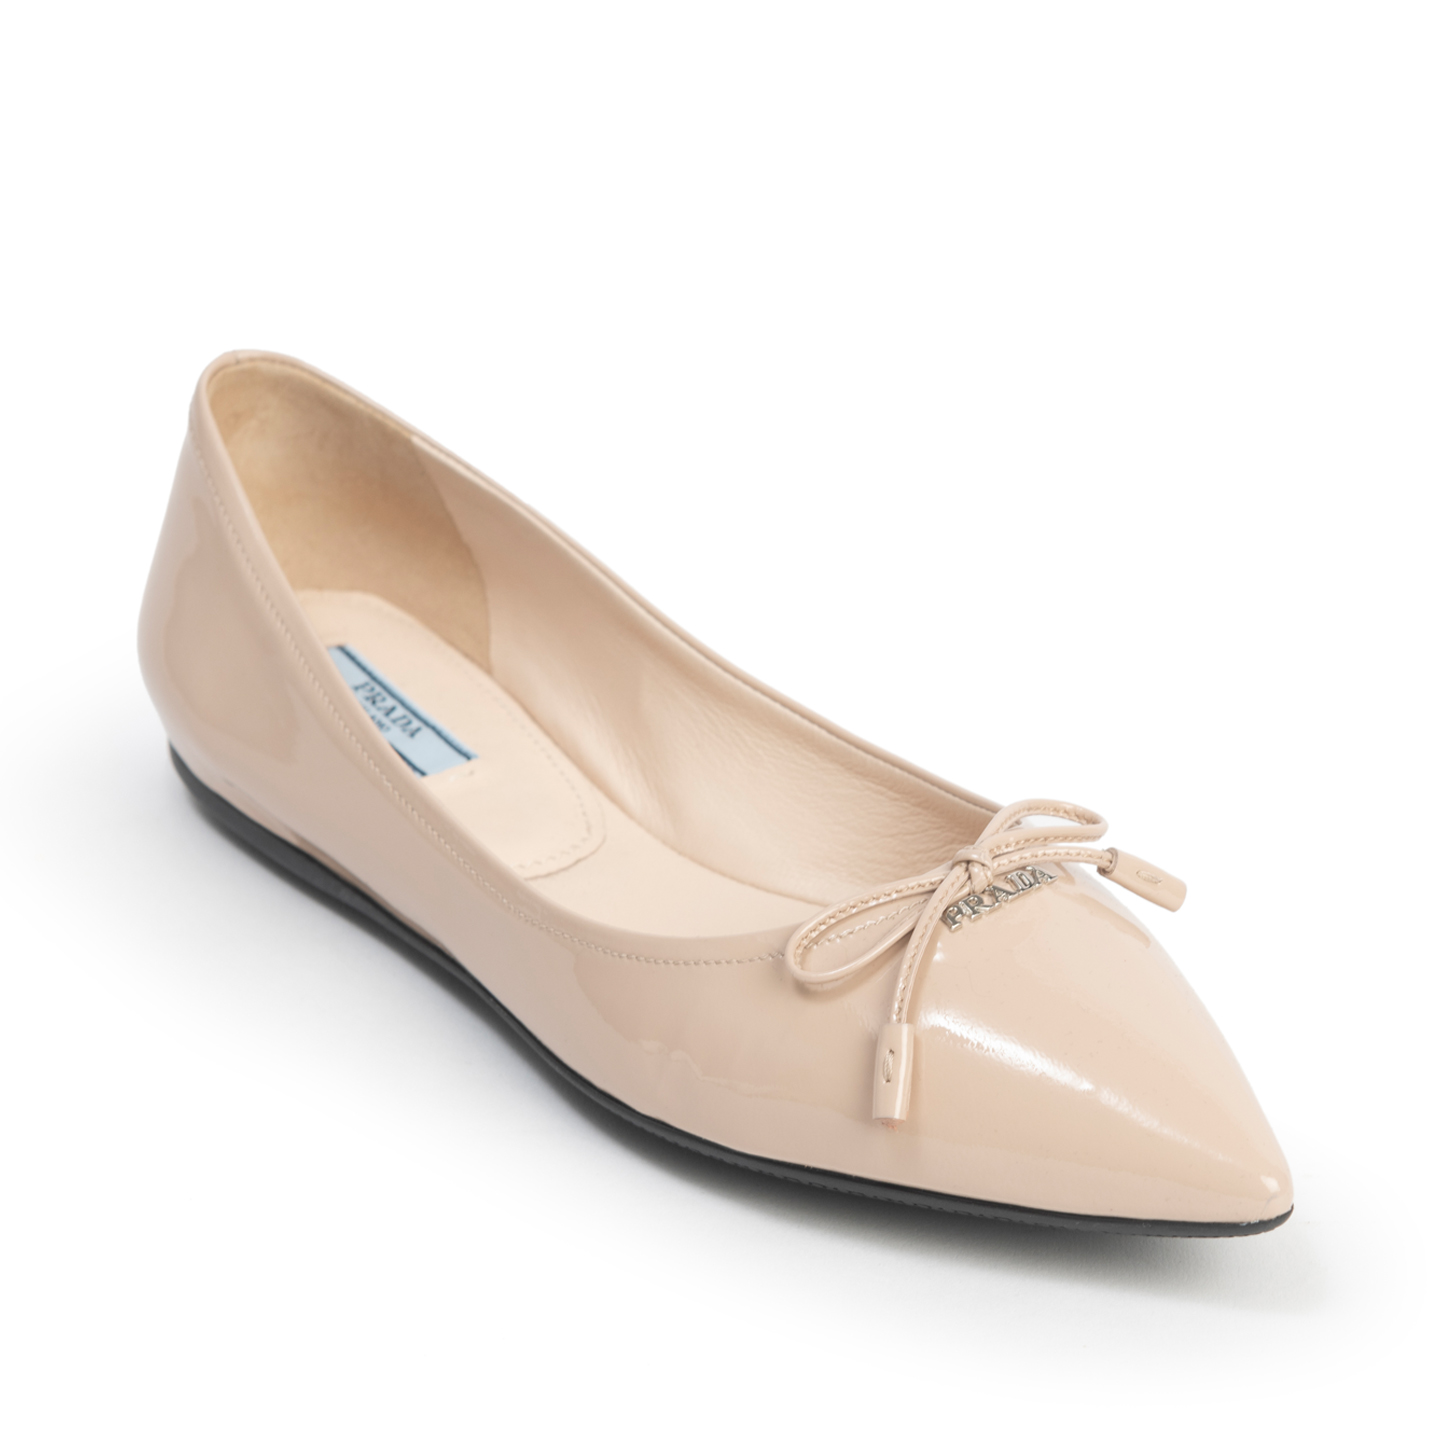 Prada Beige Patent Leather Skimmer Flats, Size 38 - LabelCentric